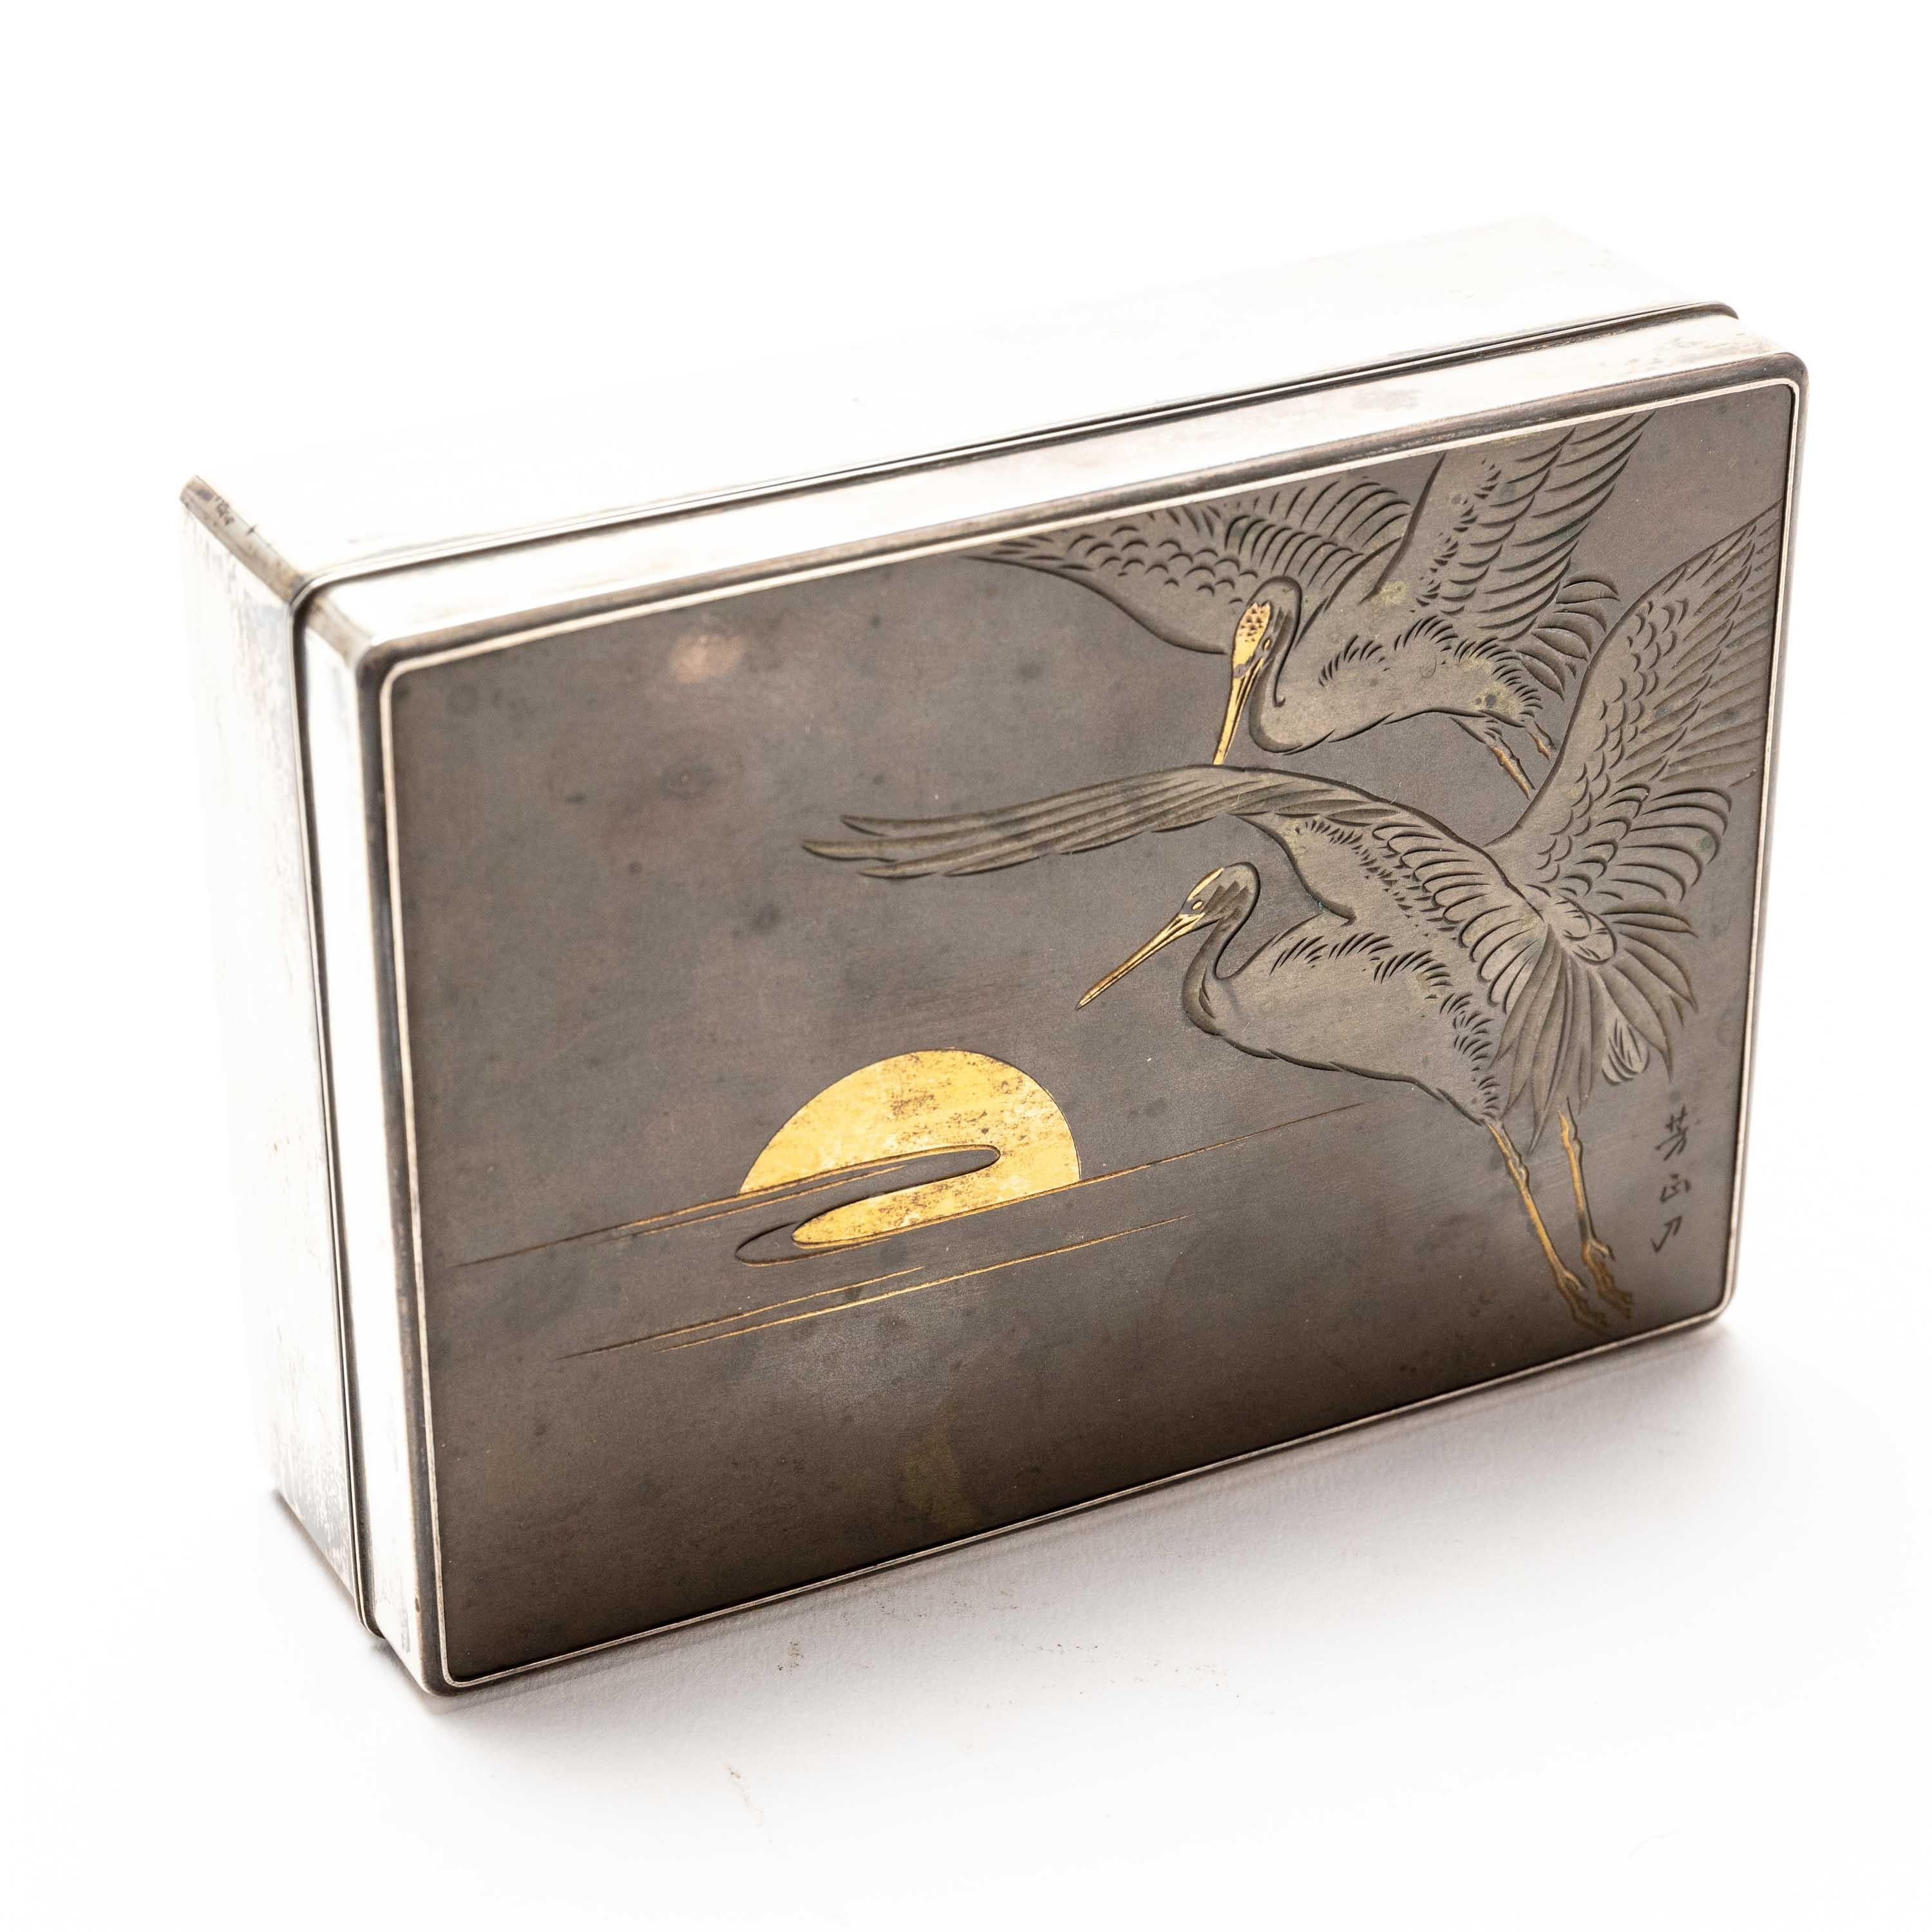 Engraved Silver Cigarette Box with Incised Cranes from Japan